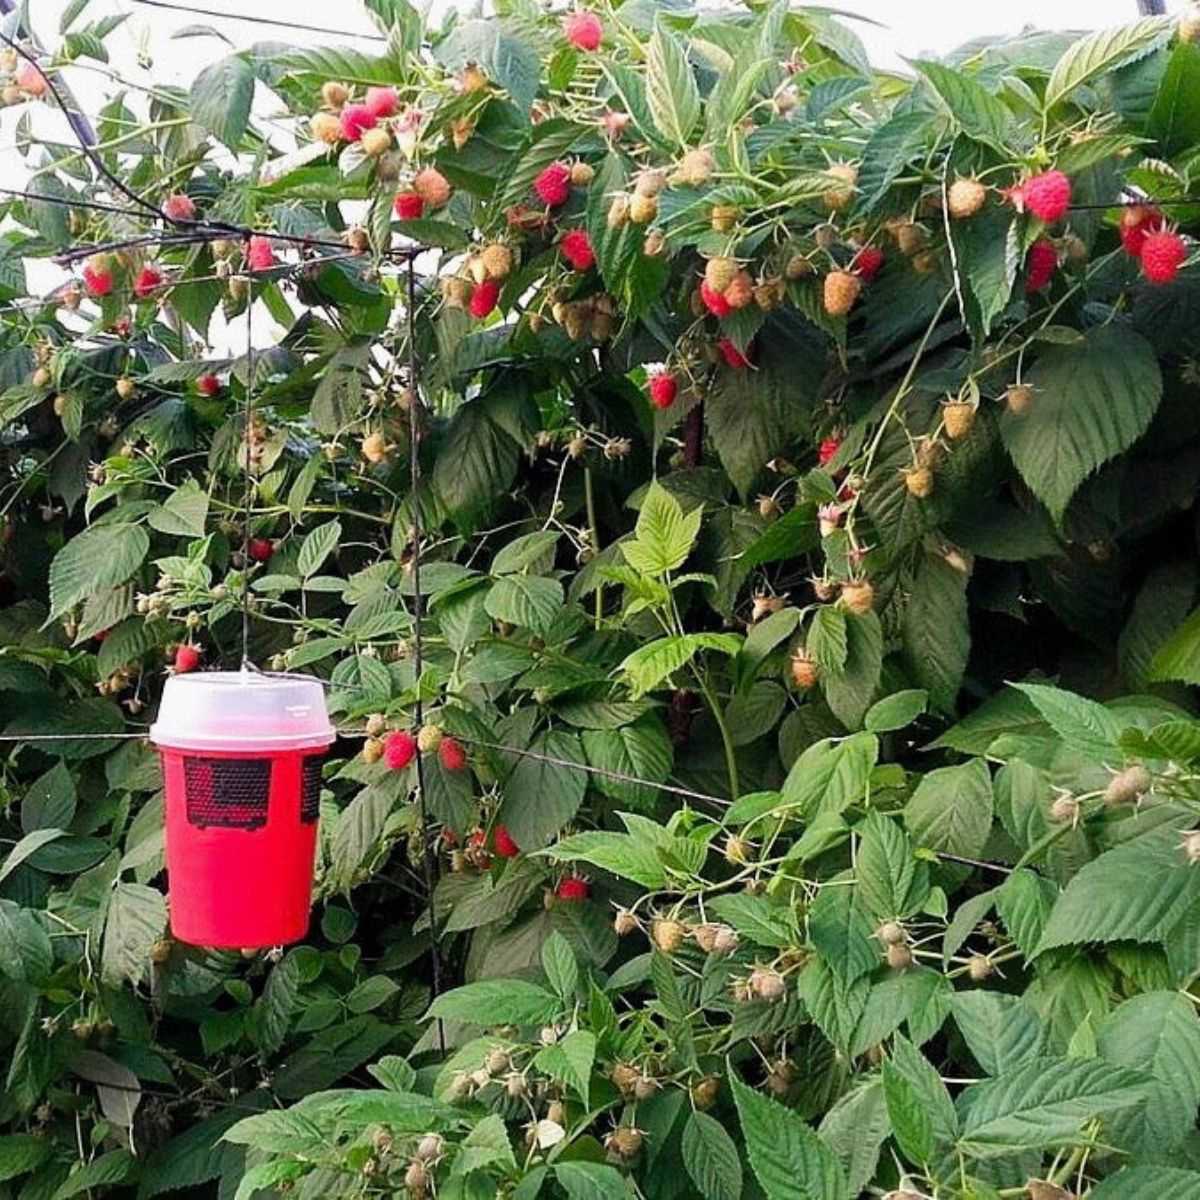 Drososan trap hung up in strawberry crop